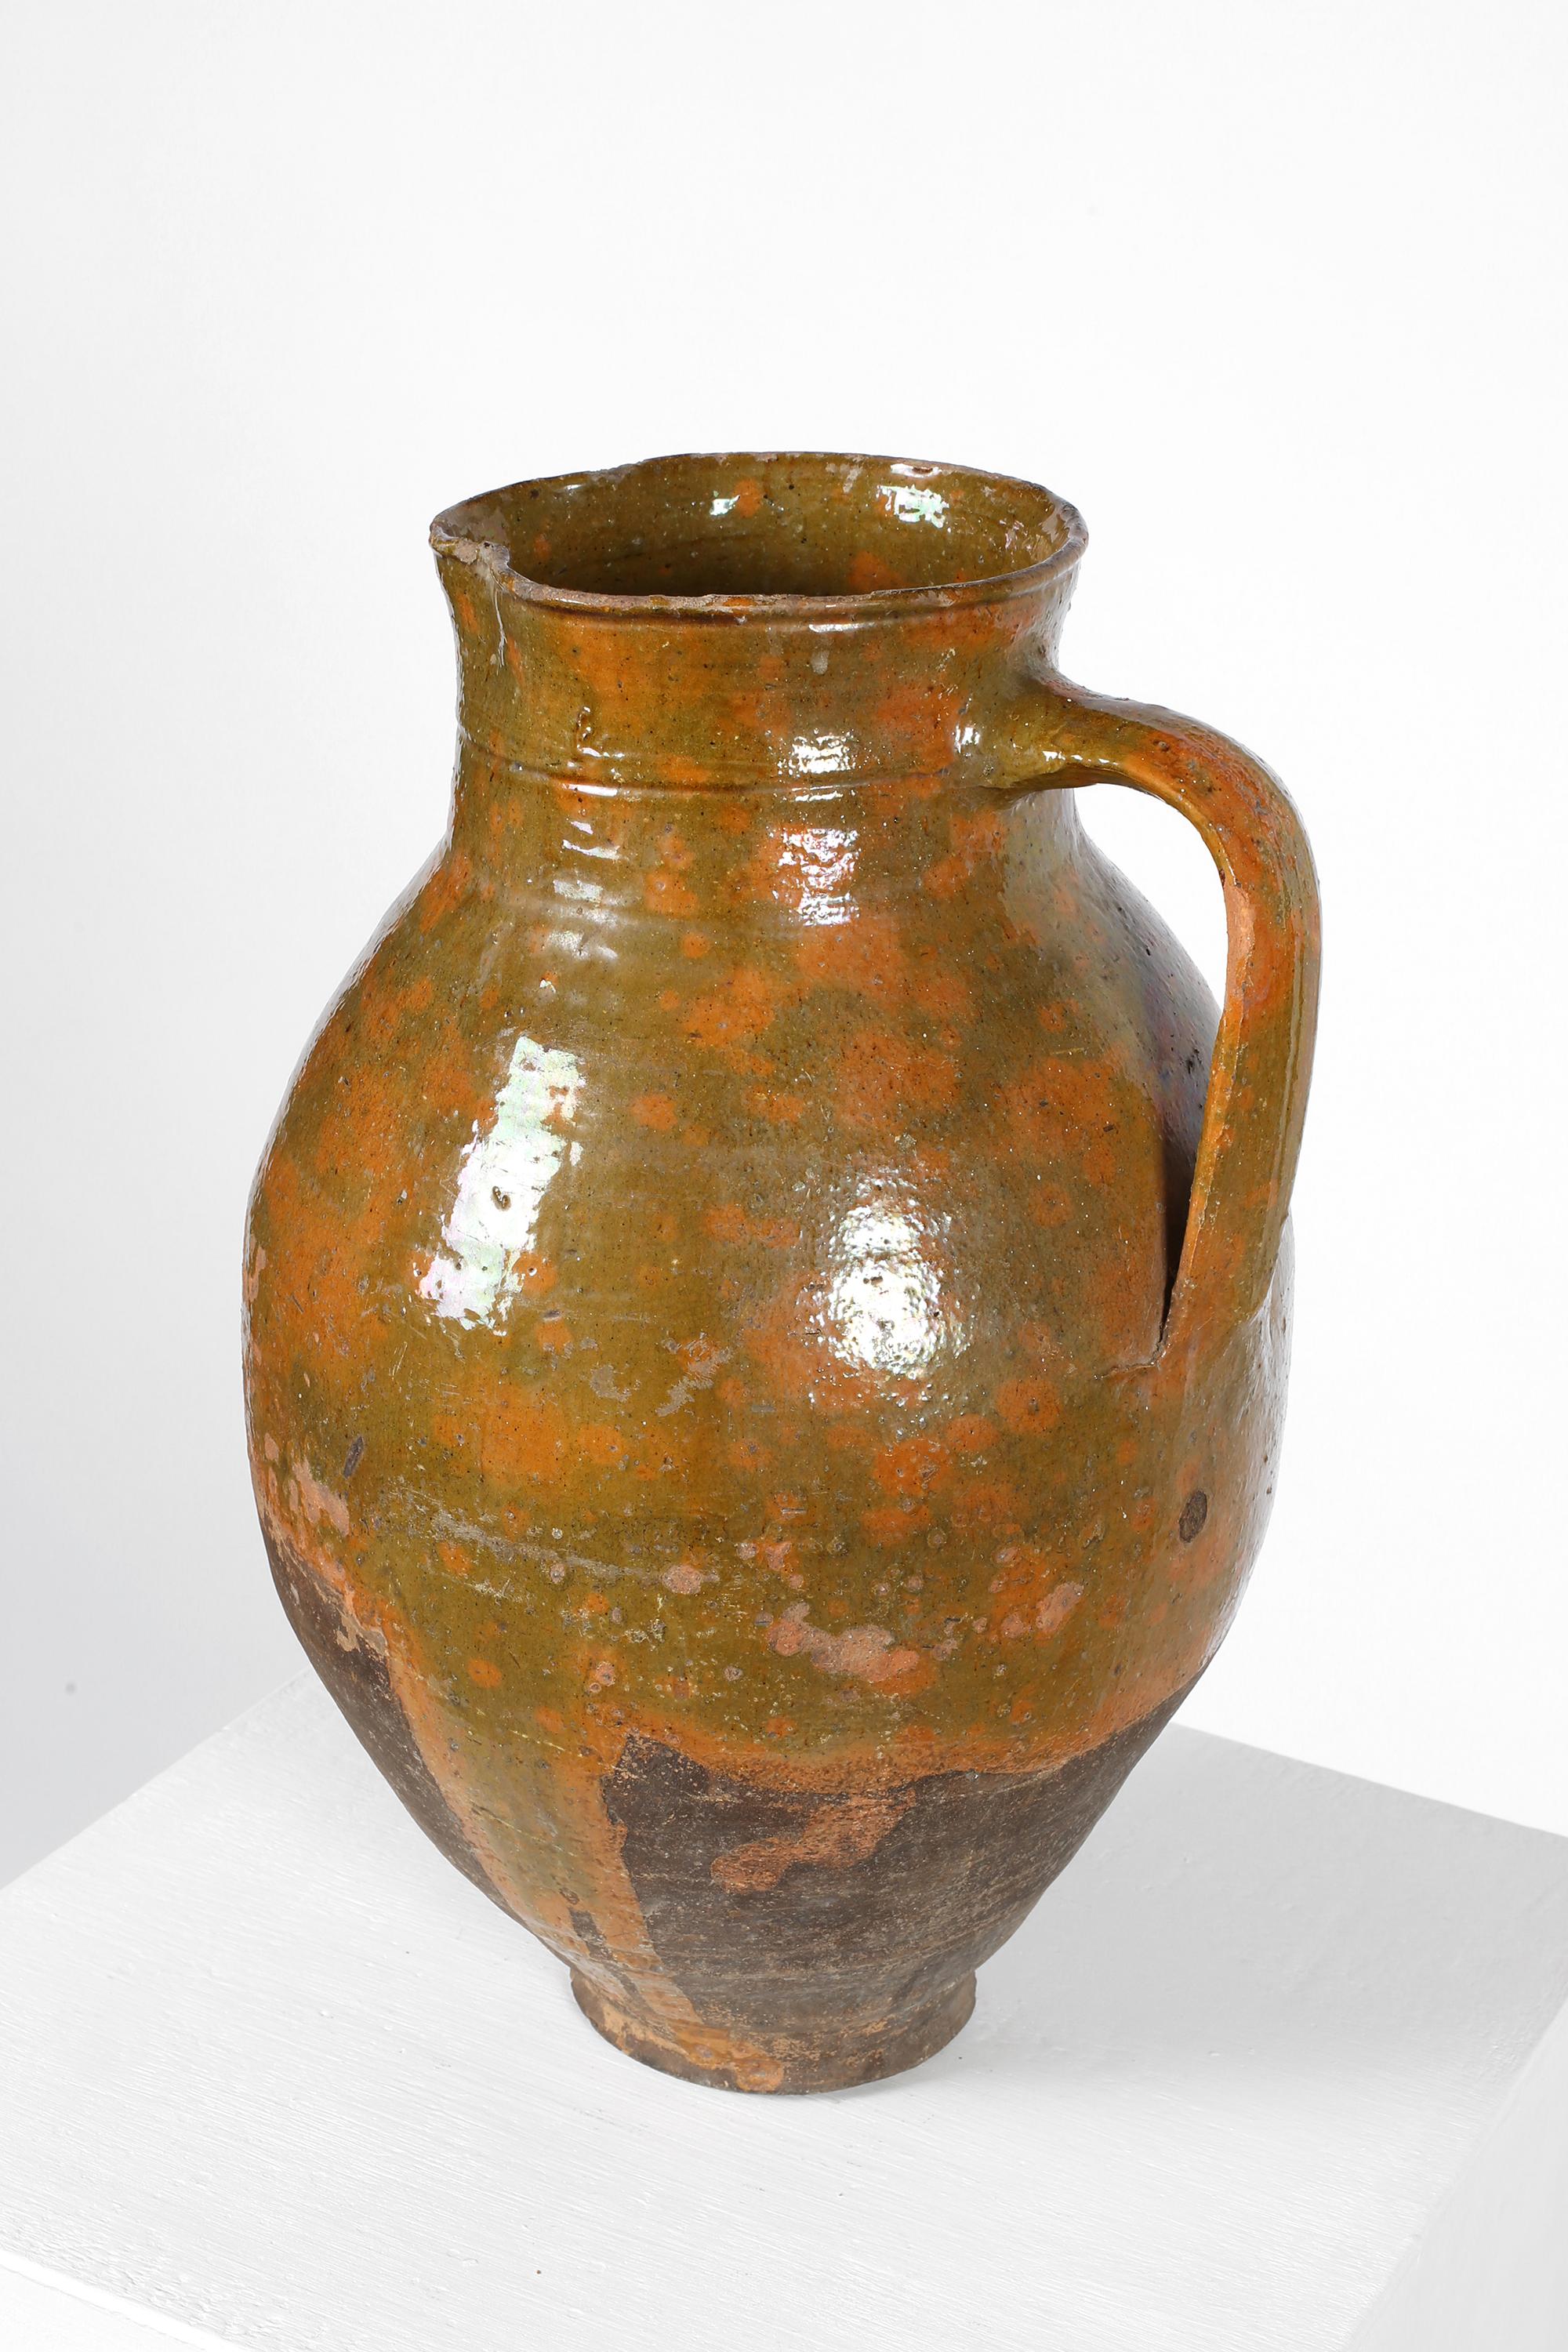 A 19th century oversized earthenware wine pitcher from Catalonia with mottled olive green/ochre part glaze. The exaggerated scale suggesting that it was likely used in a restaurant, rather than domestically. Spanish, c. 1850.